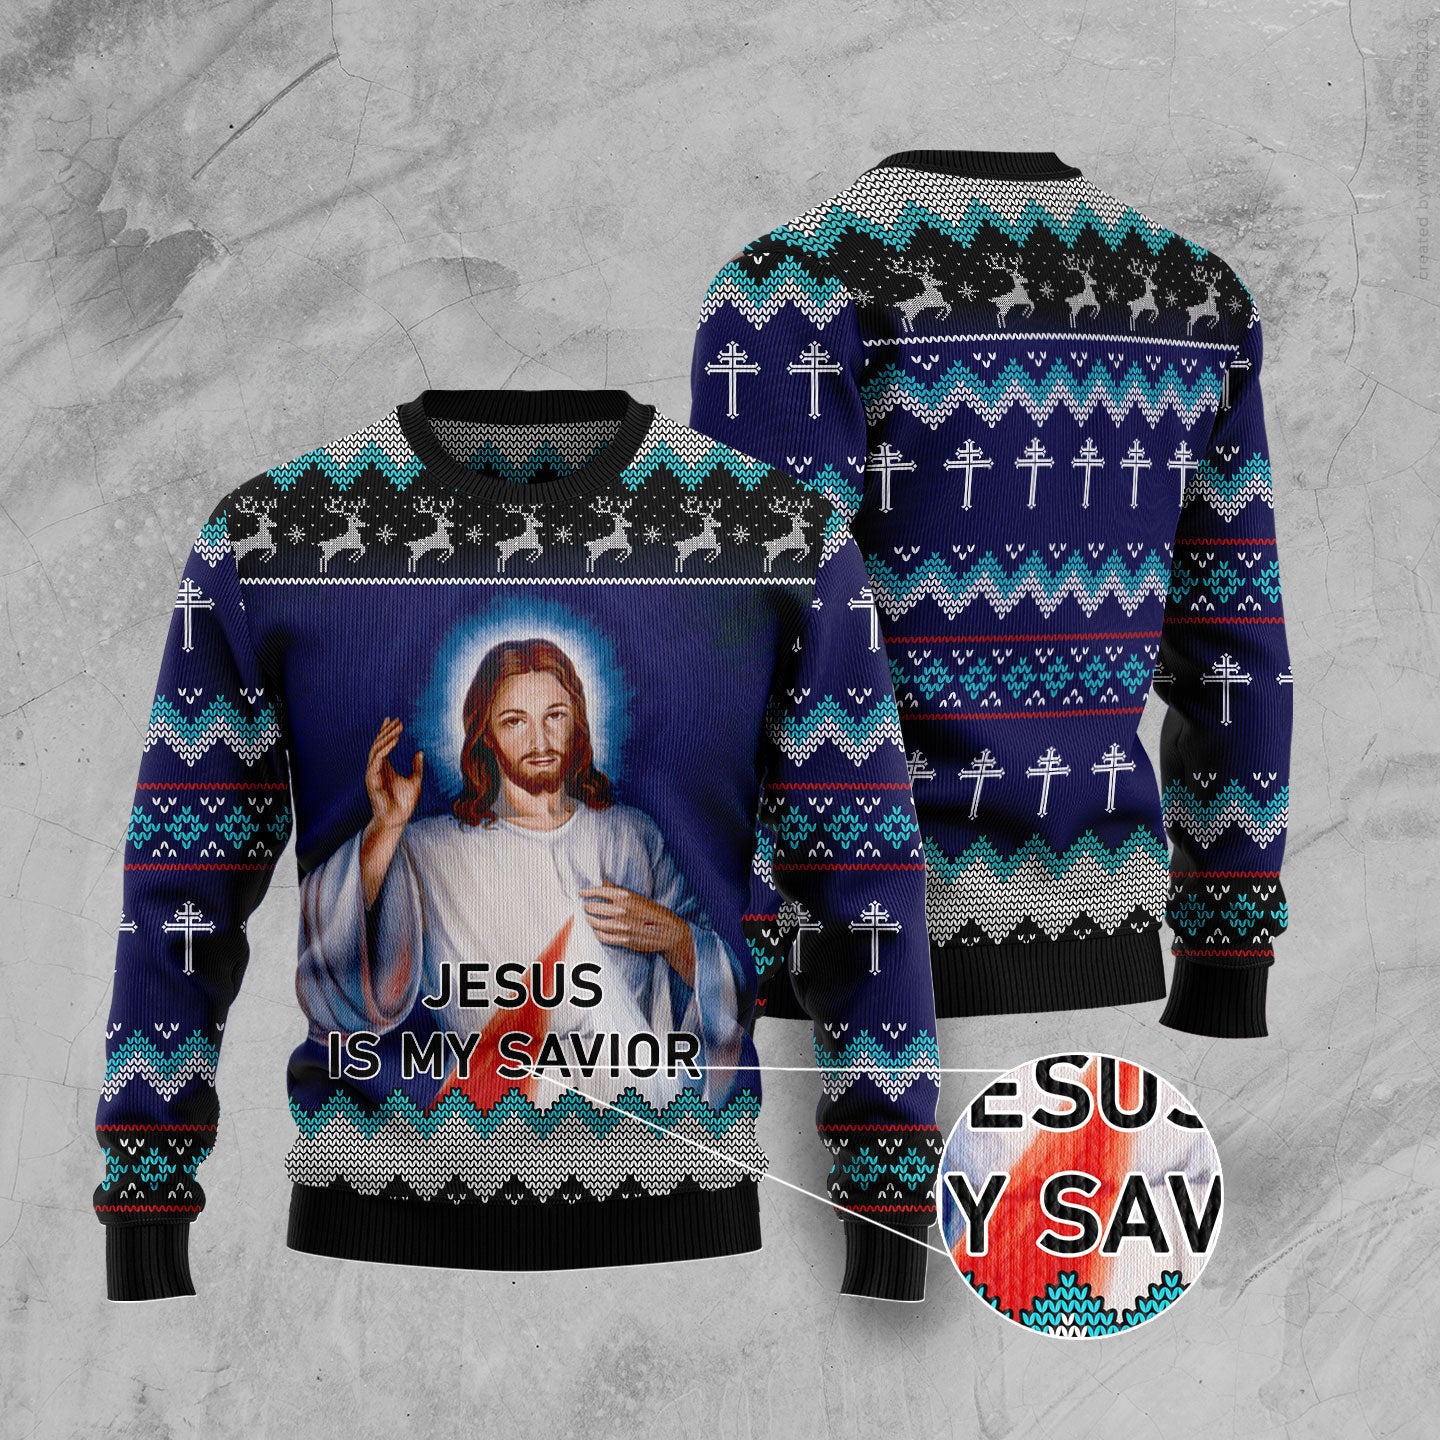 Jesus Is My Savior Ugly Christmas Sweater - Xmas Gifts For Him Or Her - Christmas Gift For Friends - Jesus Christ Sweater